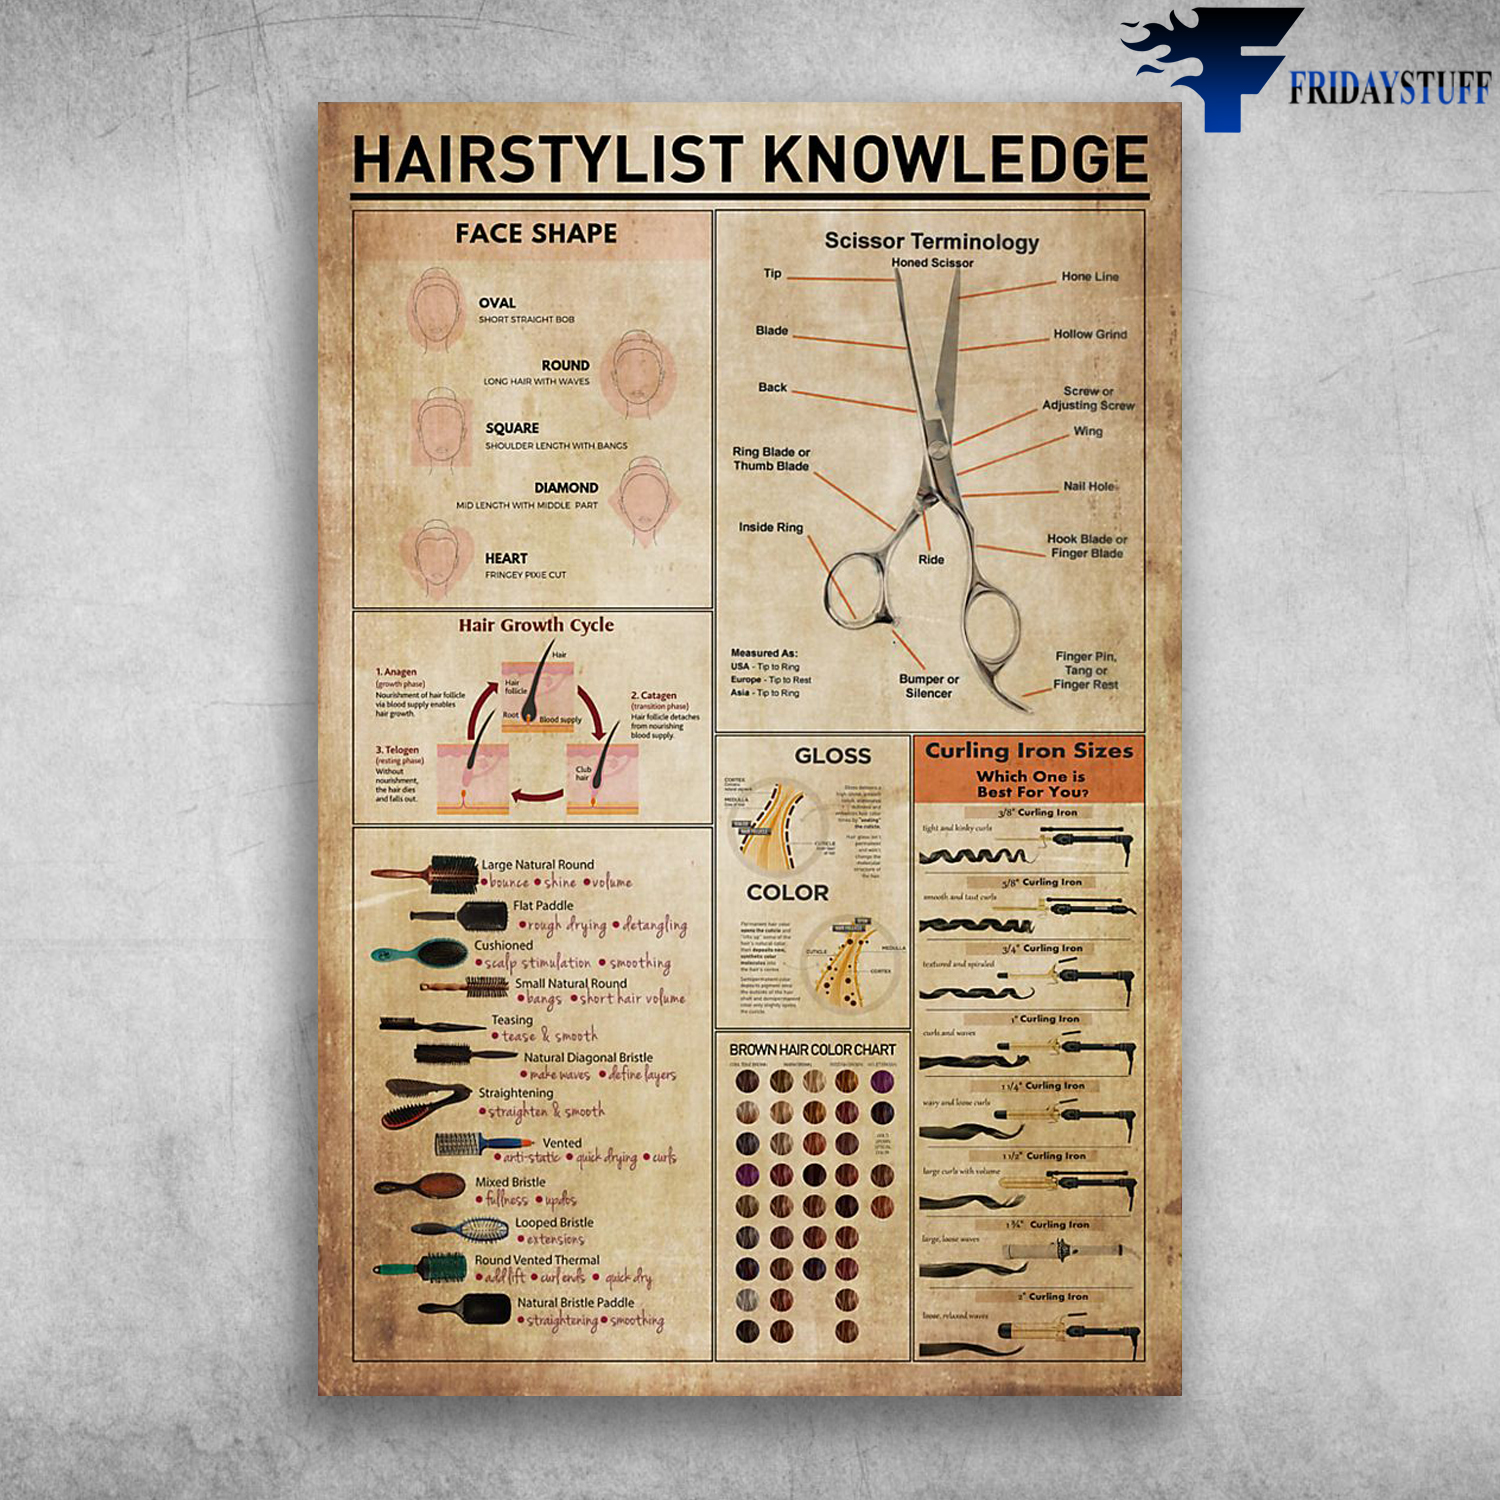 Hairstylist Knowledge Face Shape Scissor Terminology Hair Growth Cycle